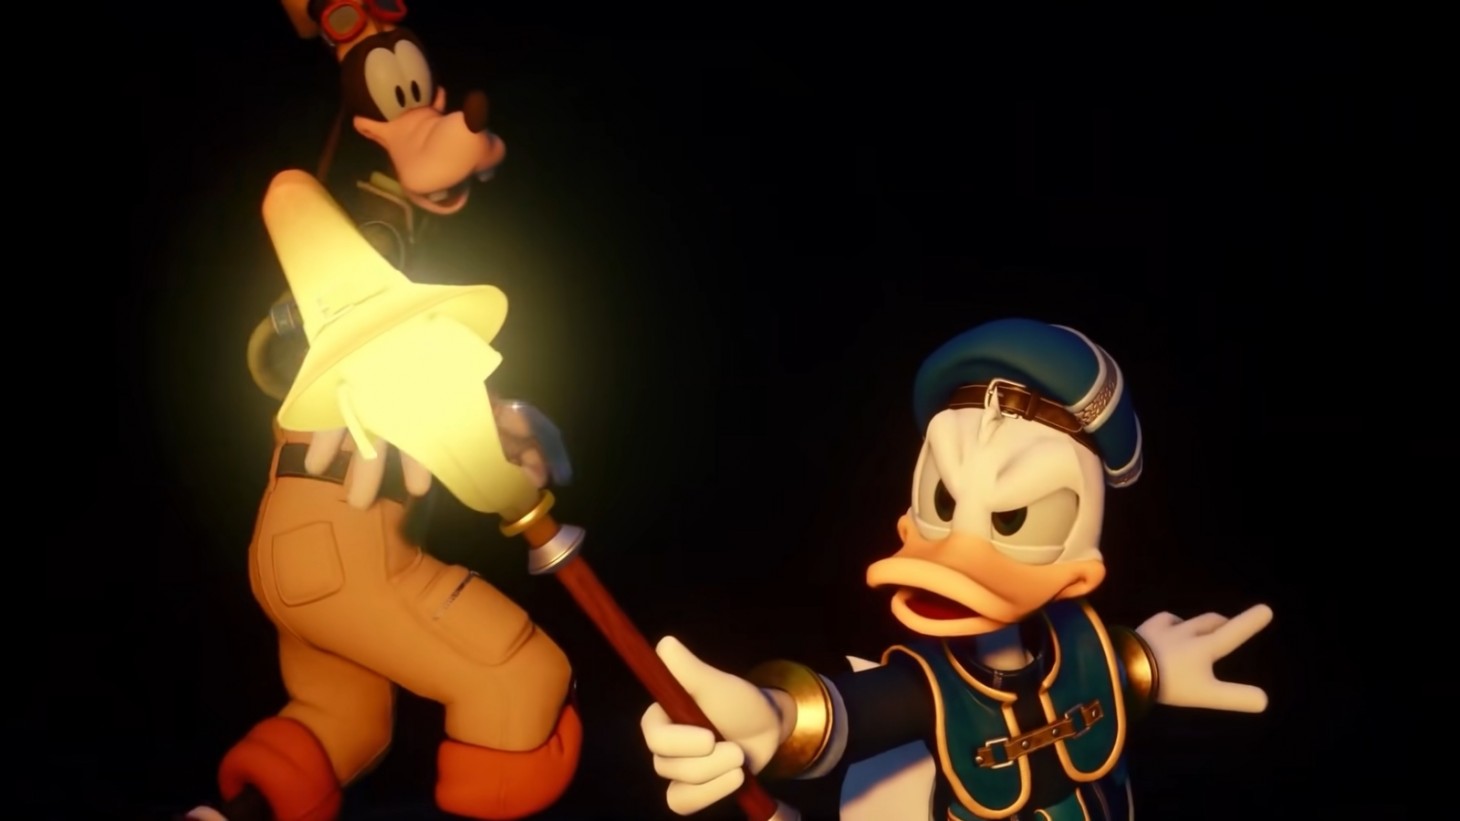 Should Kingdom Hearts 4 Include Marvel and Star Wars Worlds?